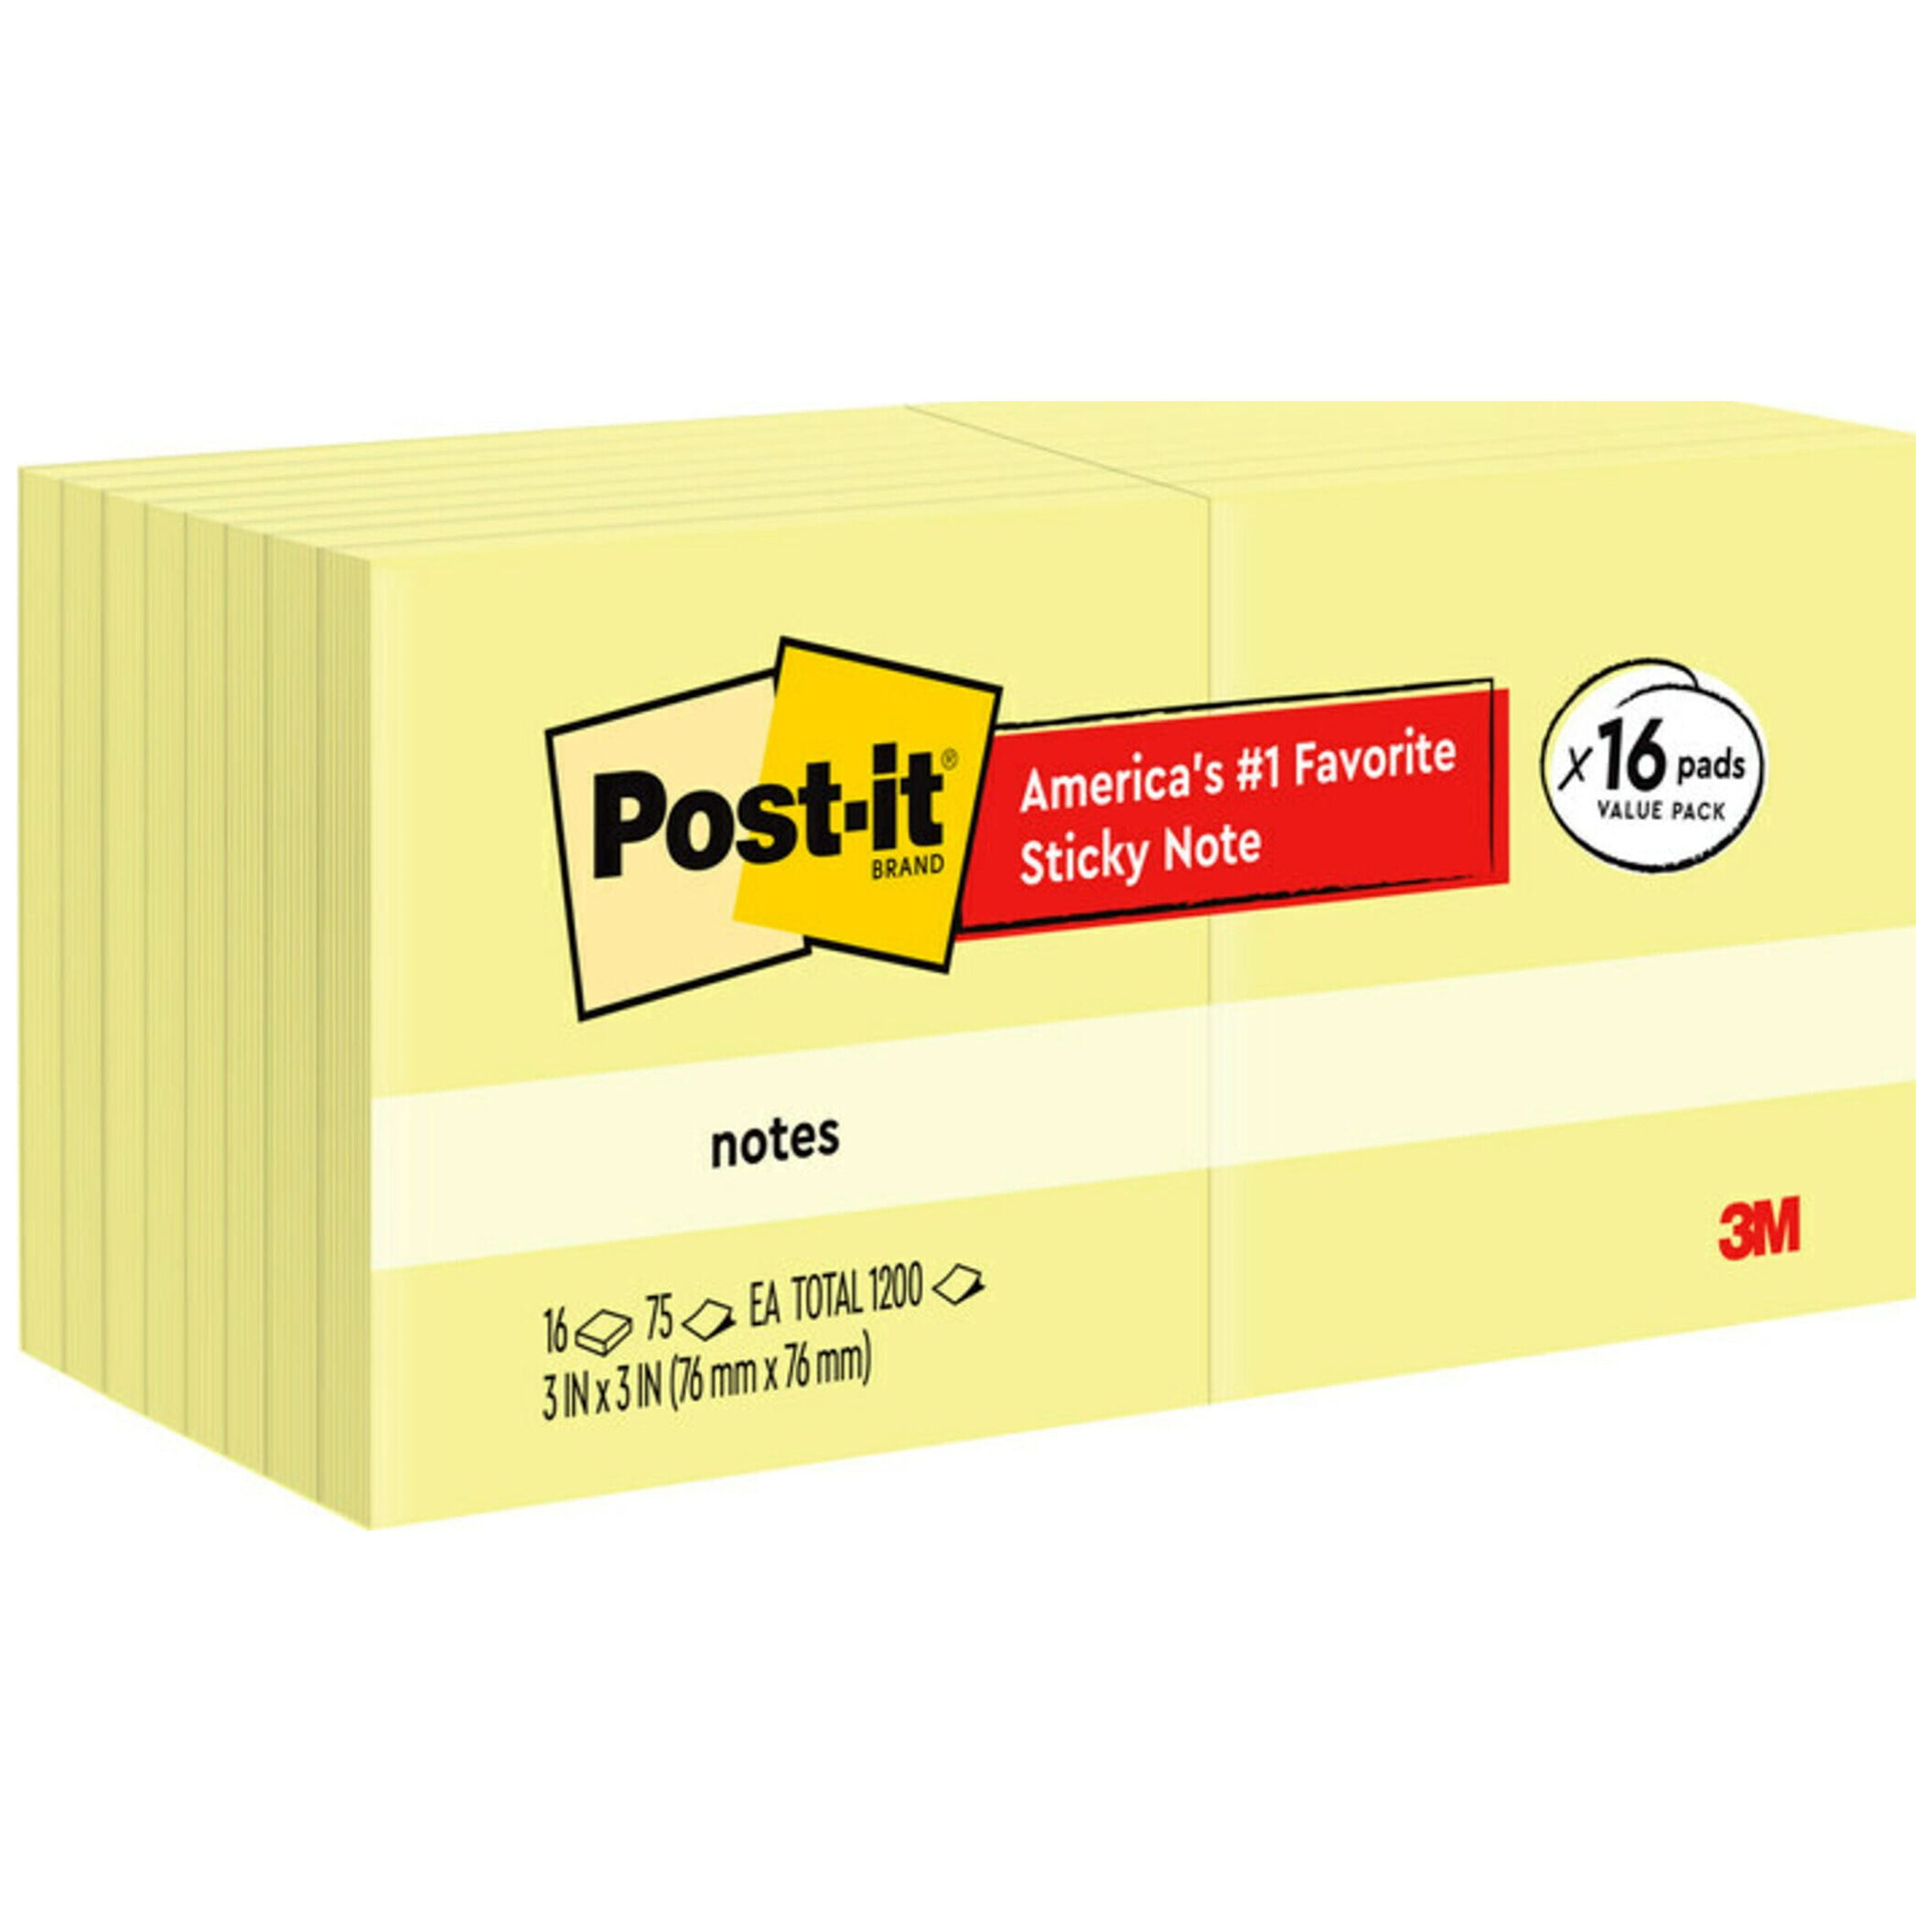  Post-it Notes, Original Pad, 3 Inches x 3 Inches, Yellow,  Value Pack, 27 Pads per Pack : Sticky Note Pads : Office Products